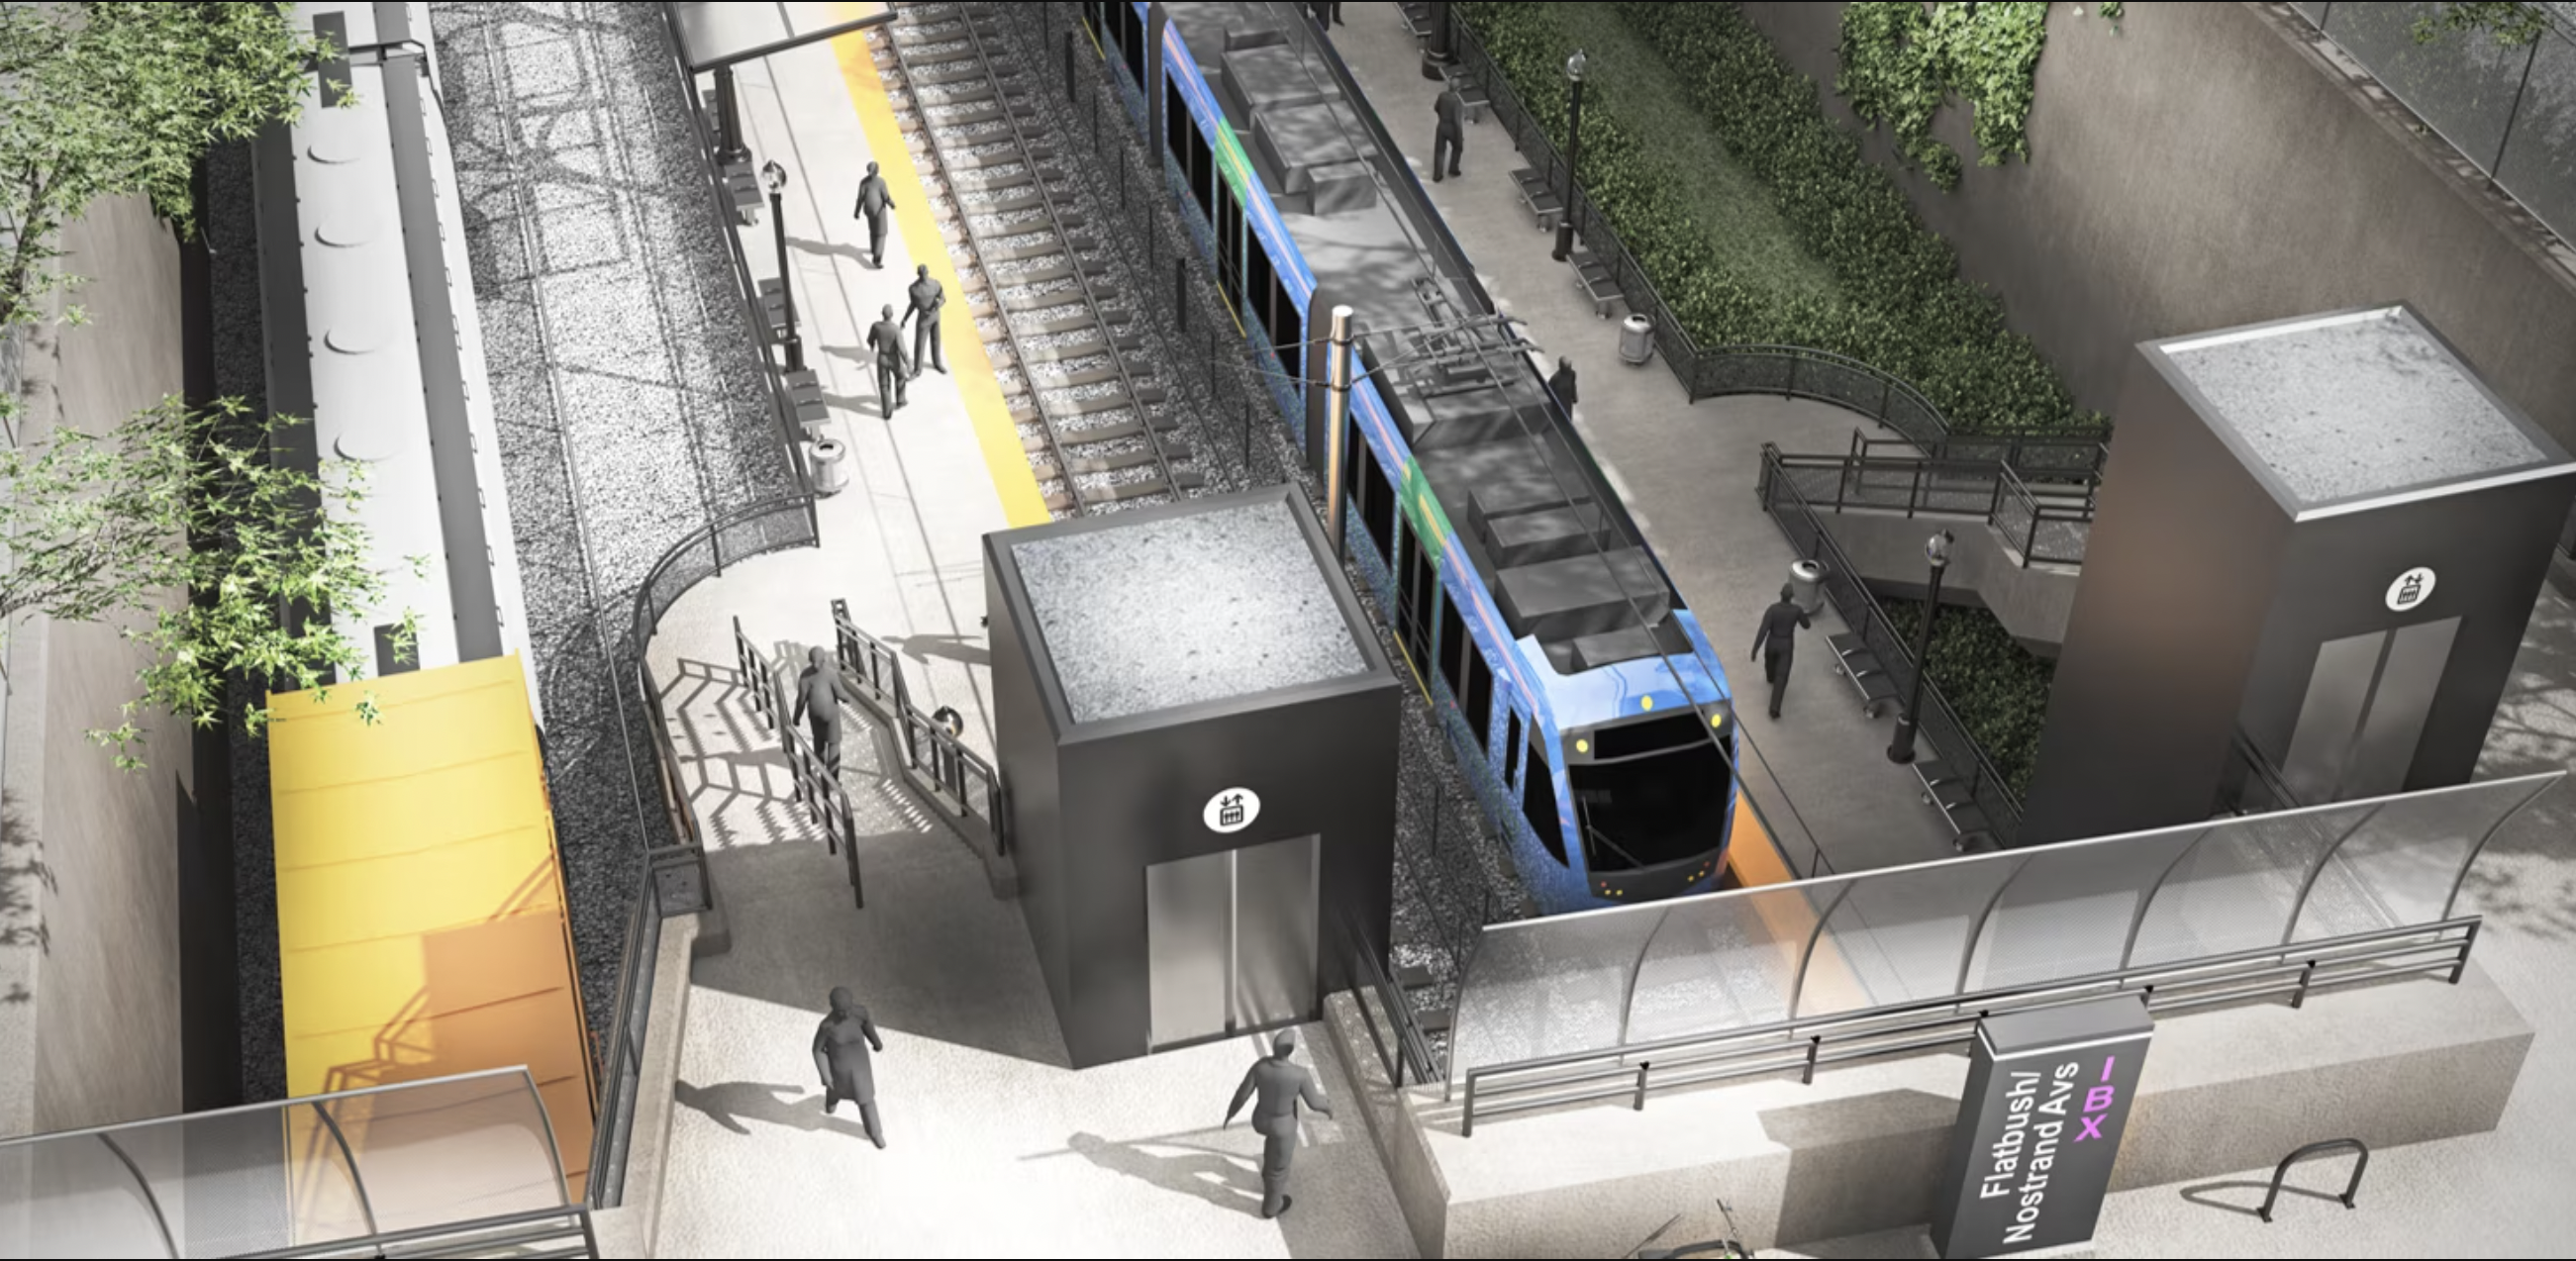 The Interborough Express is a transformative rapid transit project that will connect currently underserved areas of Brooklyn and Queens